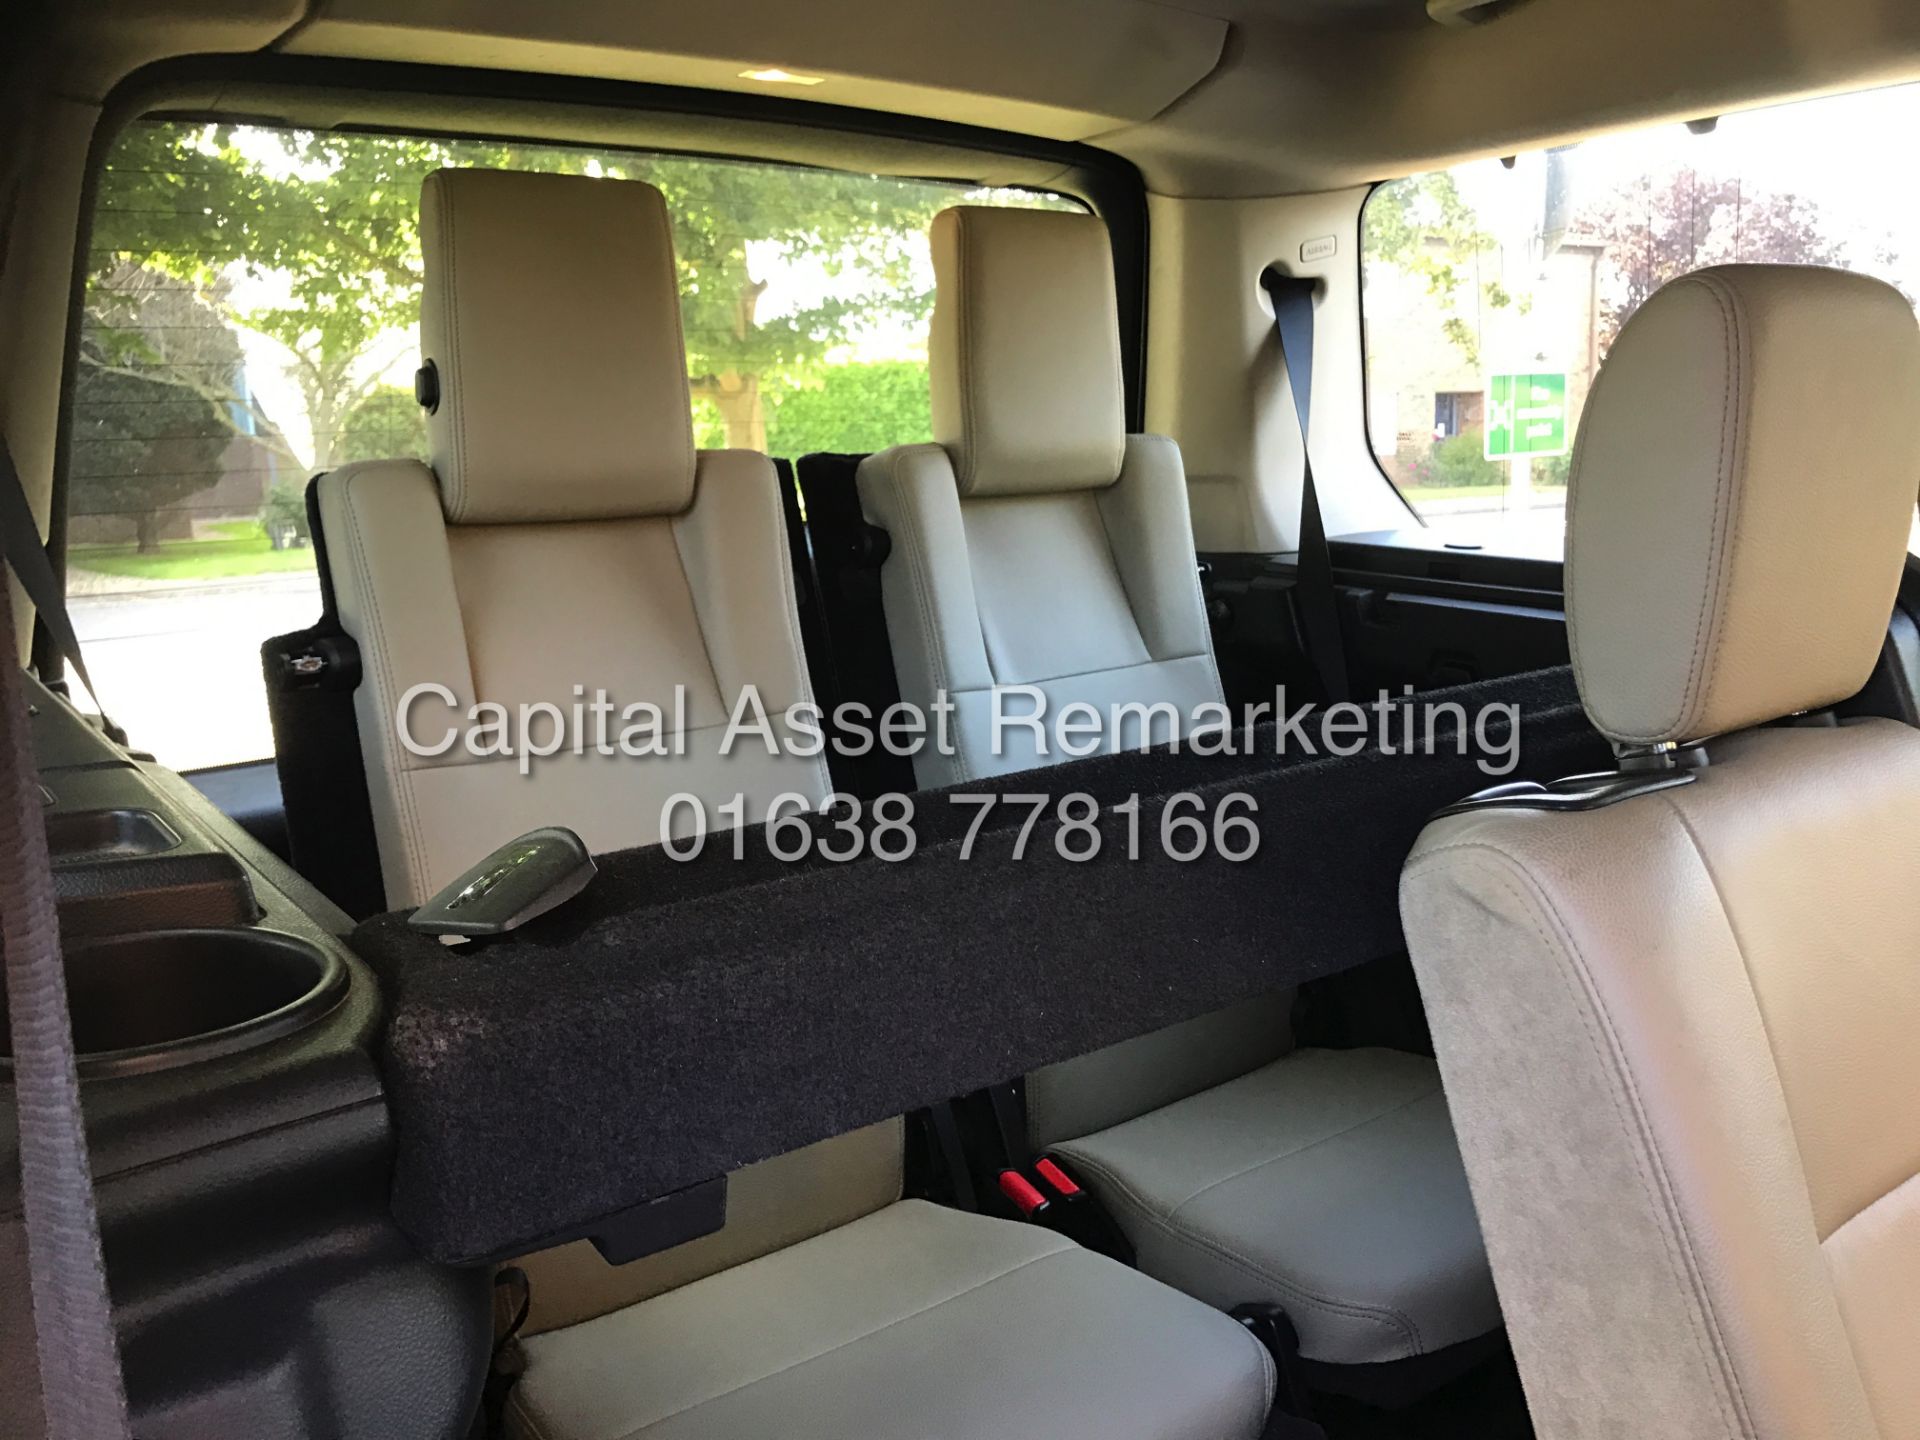 (ON SALE) LAND ROVER DISCOVERY TDV6 "SE 7 SEATER" GREAT SPEC - SAT NAV - FULL LEATHER - NO VAT - Image 25 of 28